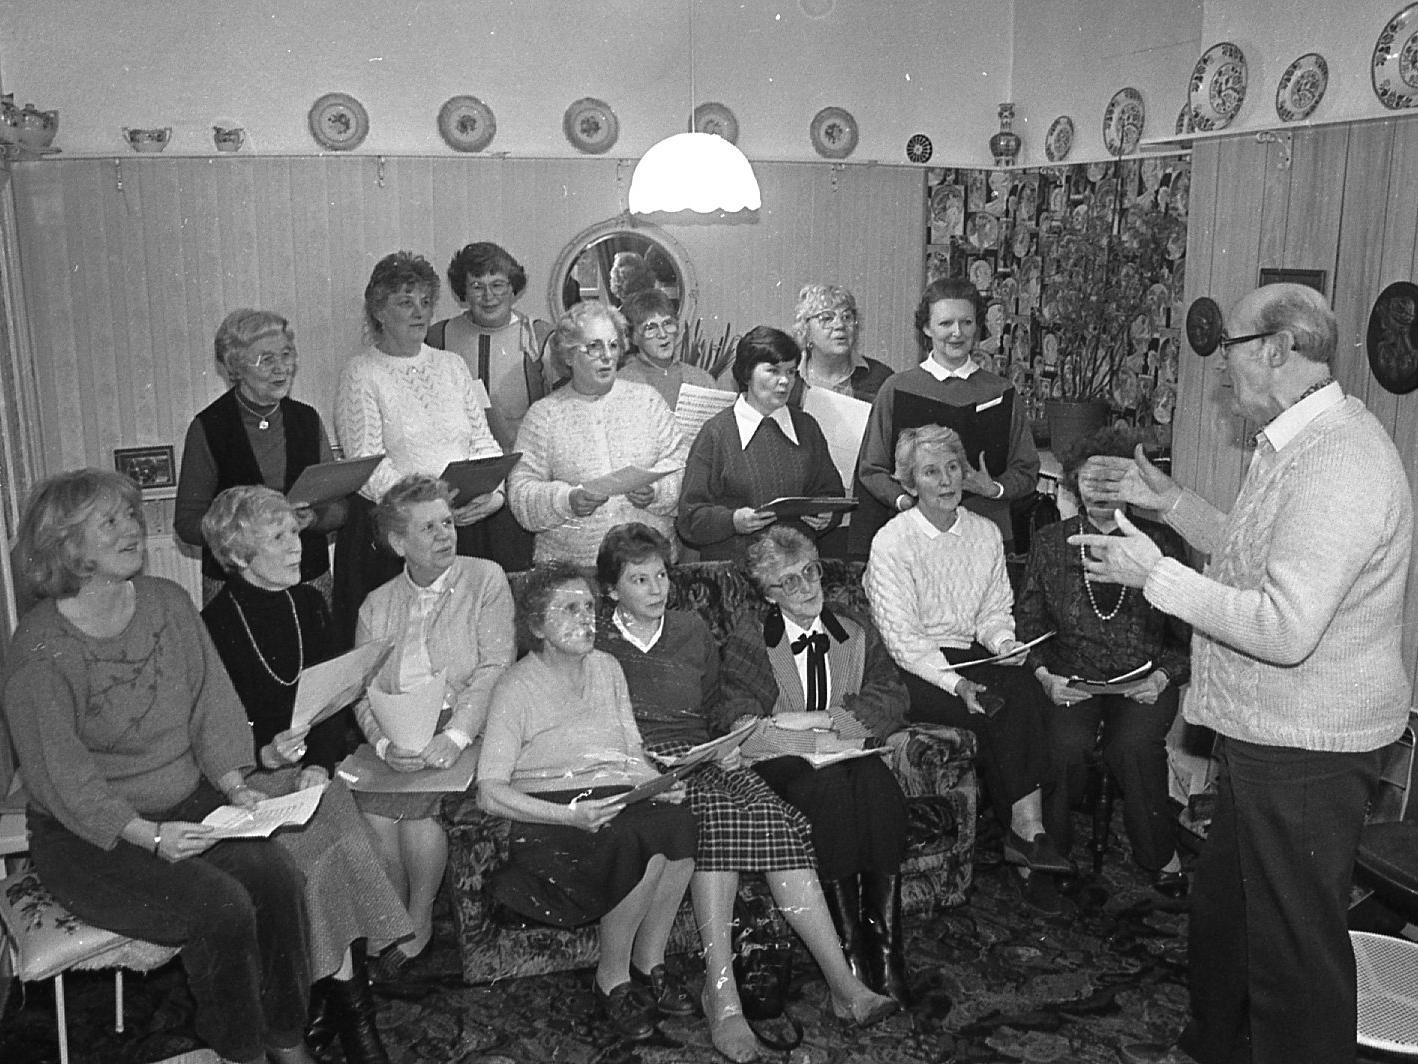 The ladies of the Lytham St Annes University of the Third age have their own barbershop singing group. About 20 of them meet once a week, under the musical direction of Mr Bill Henderson, at the home of co-ordinator Mrs Mary Dowling